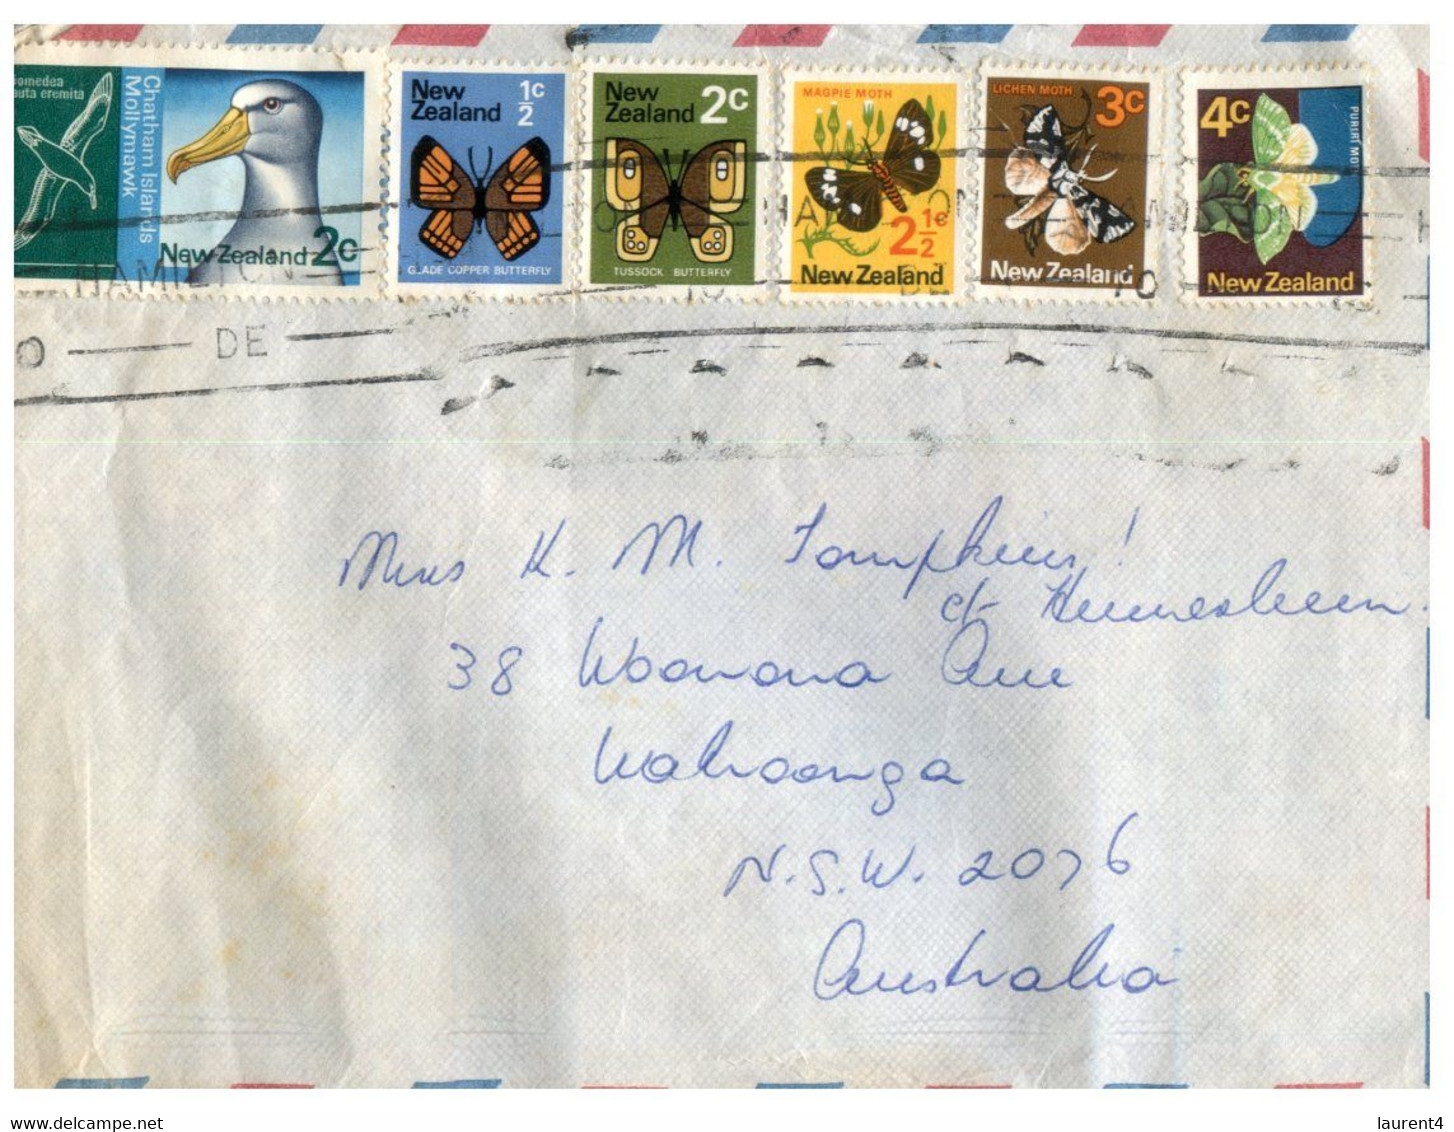 (HH 29) New Zealand FDC Cover Posted To Australia - With Many Butterfly Stamps... (early 1970s ?) - Briefe U. Dokumente